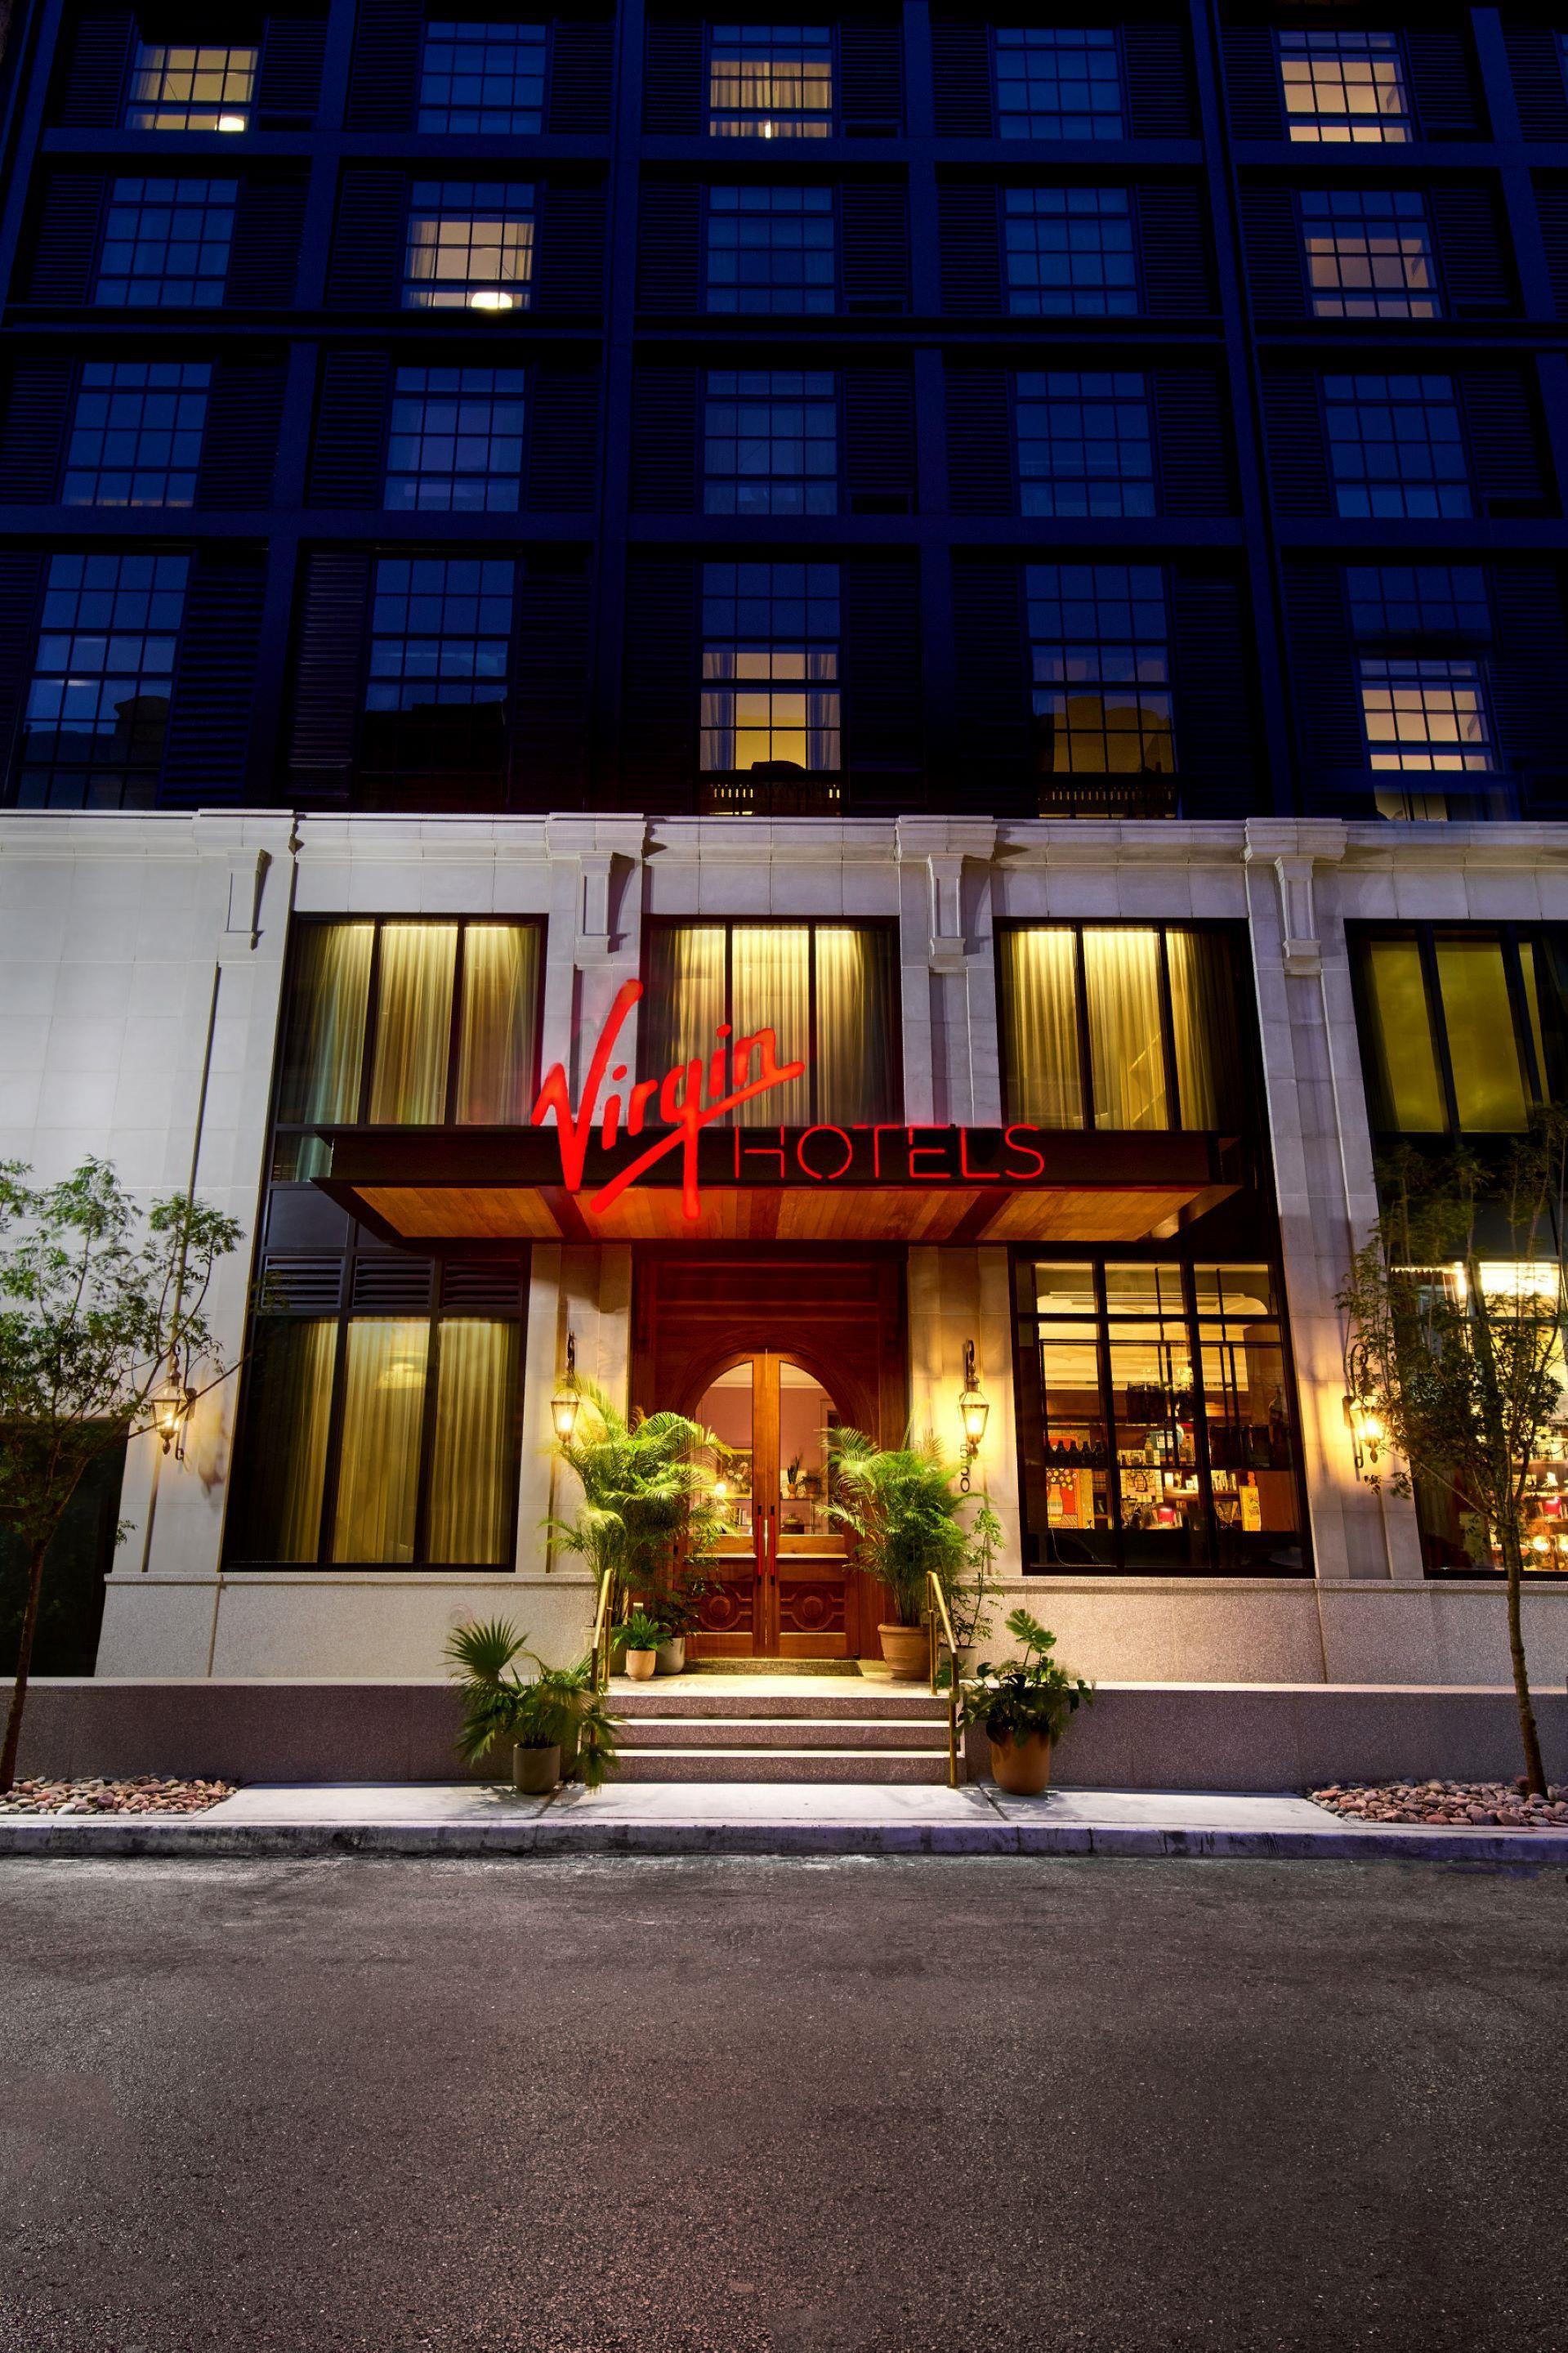 Virgin Hotels New Orleans, #1 Hotel in New Orleans - Tripadvisor & Conde Nast Readers Choice Awards in New Orleans, LA